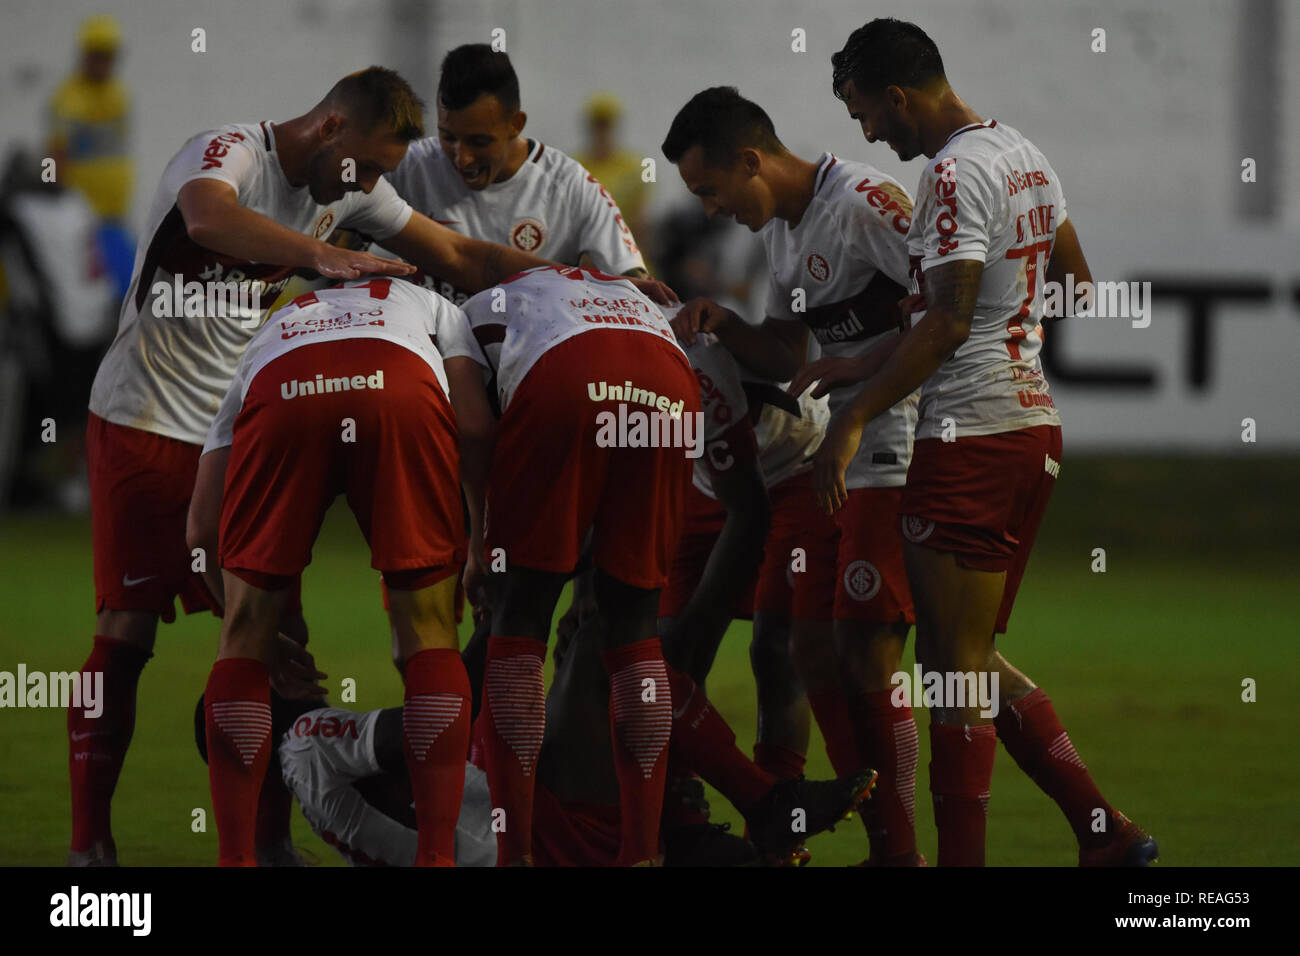 Emerson Santos celebrates his goal with players of his team during a match against S o Luiz in the stadium October 19 for the state championship 2019 RS - Porto Alegre - 01/20/2019 - Gaucho 2019, S o Luiz x Internacional - Photo: Renato Padilha / AGIF Stock Photo